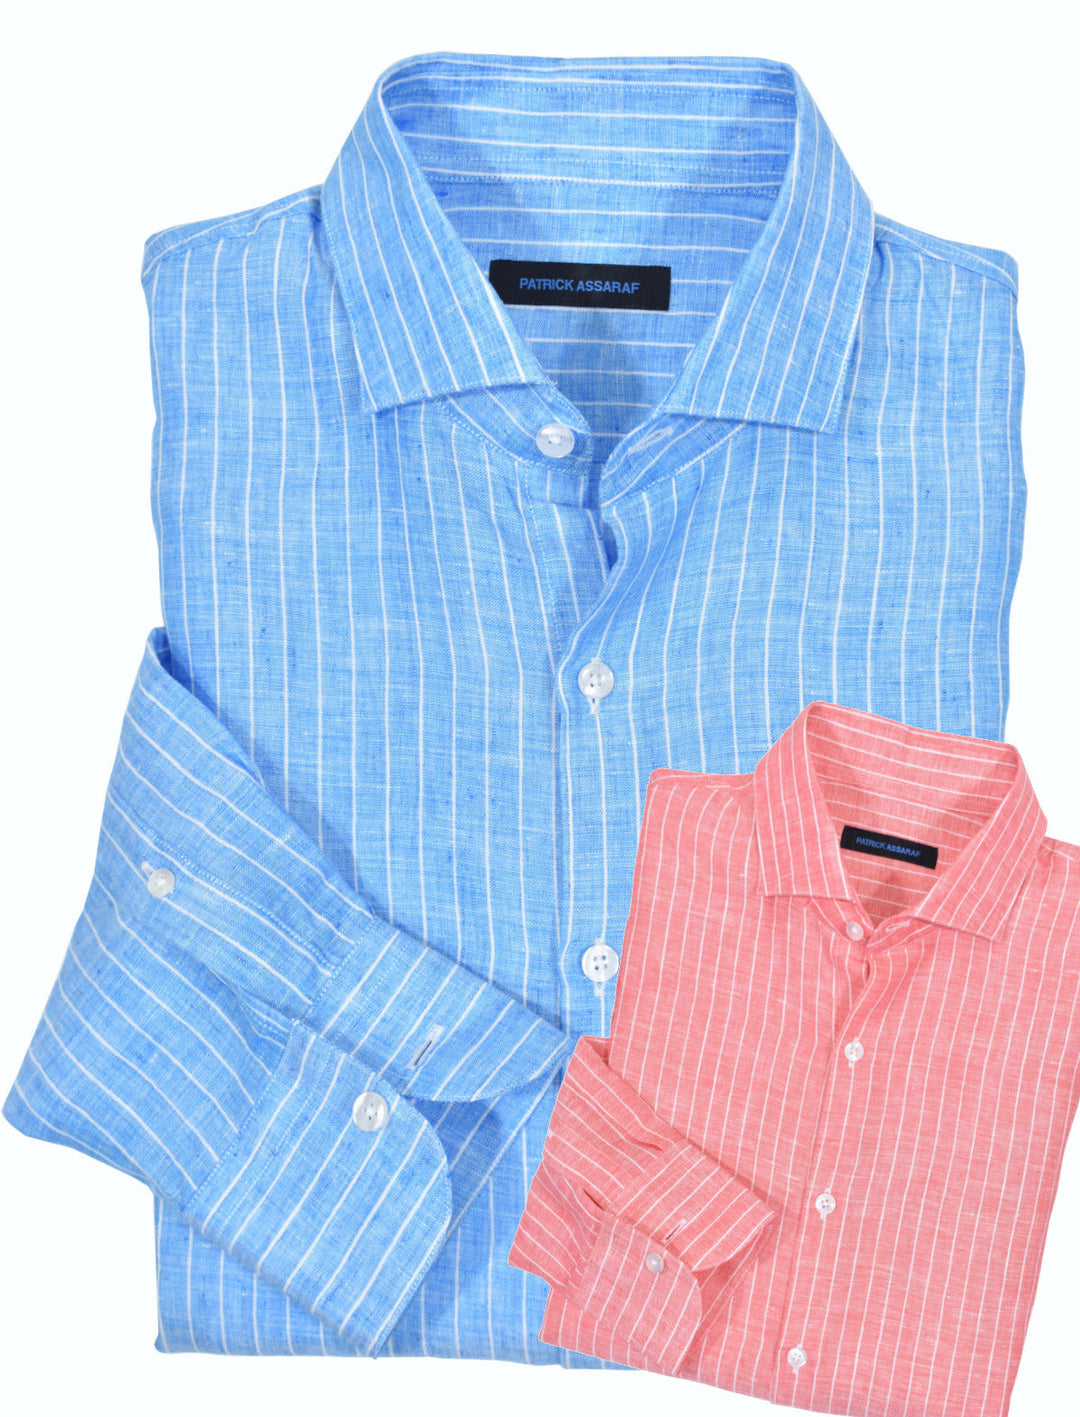 Enzyme washed, Italian designed, soft and light weight linen fabric with a classic fine stripe. Create a sophisticated image with these shirts and a lightweight casual pant.  Soft washed and a medium spread collar that has light fusing for a softer casual effect.  Classic shaped fit.   Colors: Blue, Coral